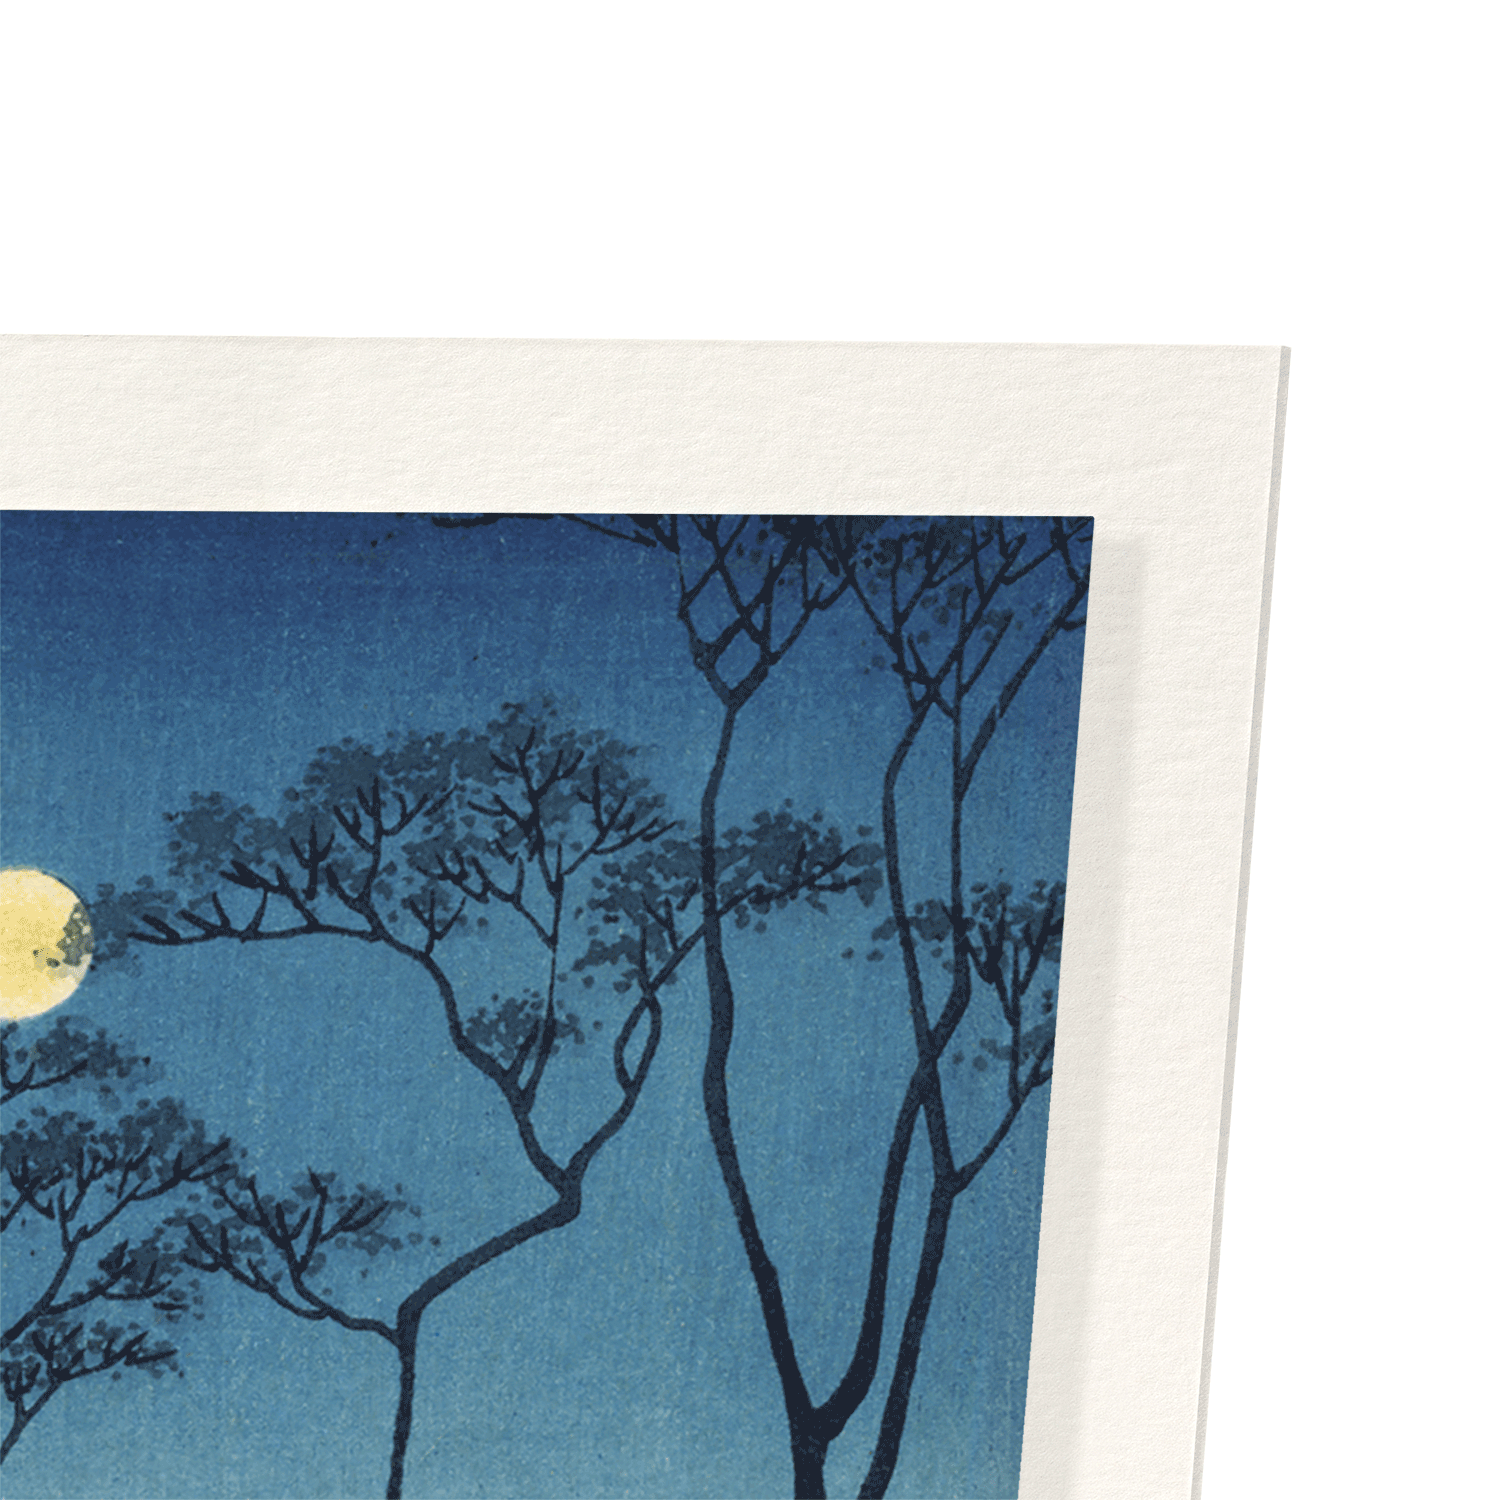 CANAL BY MOONLIGHT: Japanese Art Print